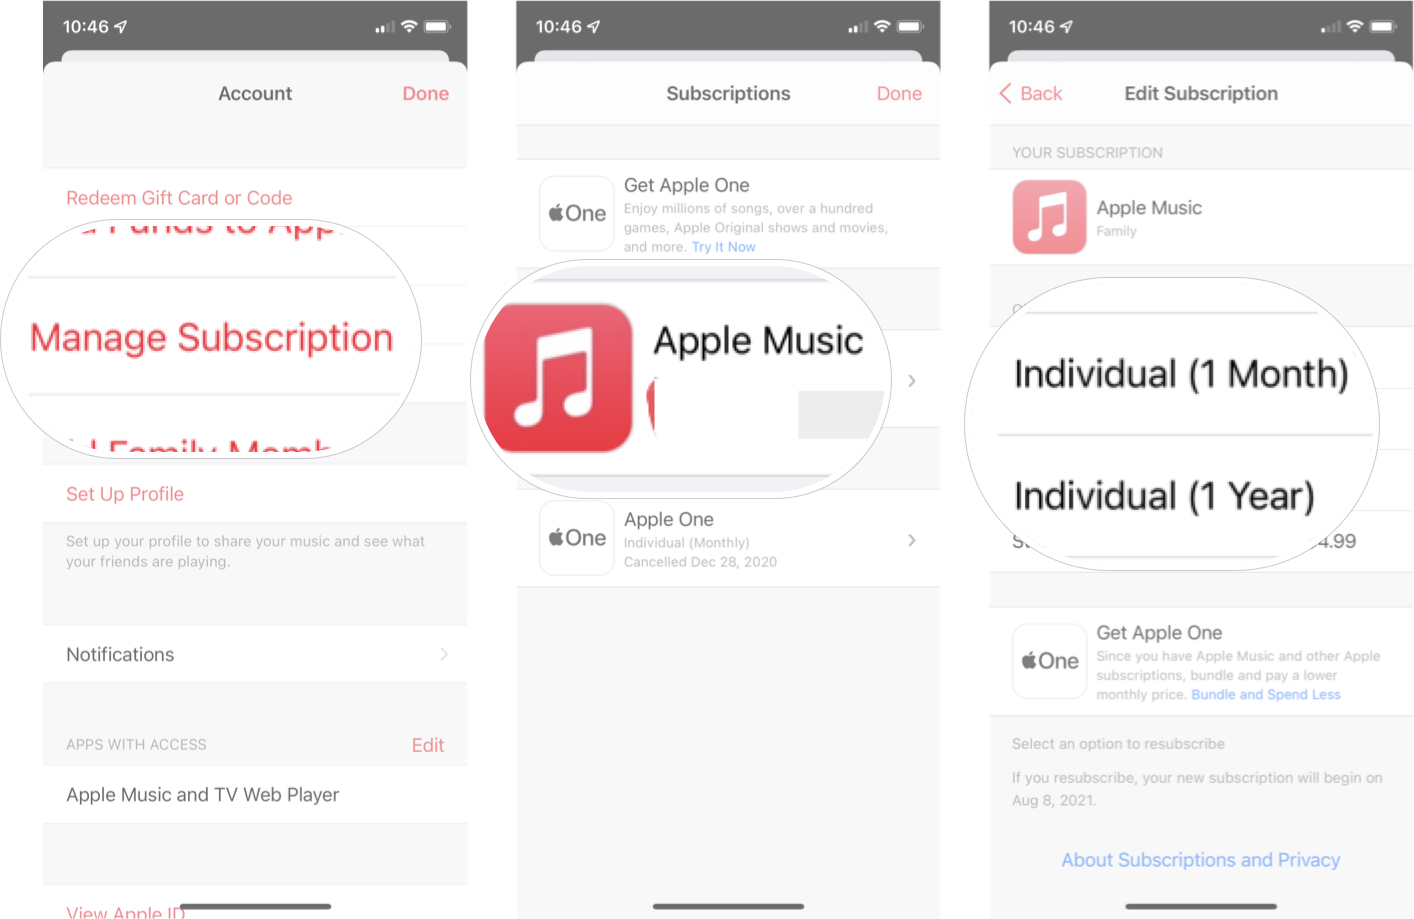 How To Switch From Family To Single Apple Music Plan On IOS 14: Tap Manage Subscription, tap Apple Music, and then tap Family plan.